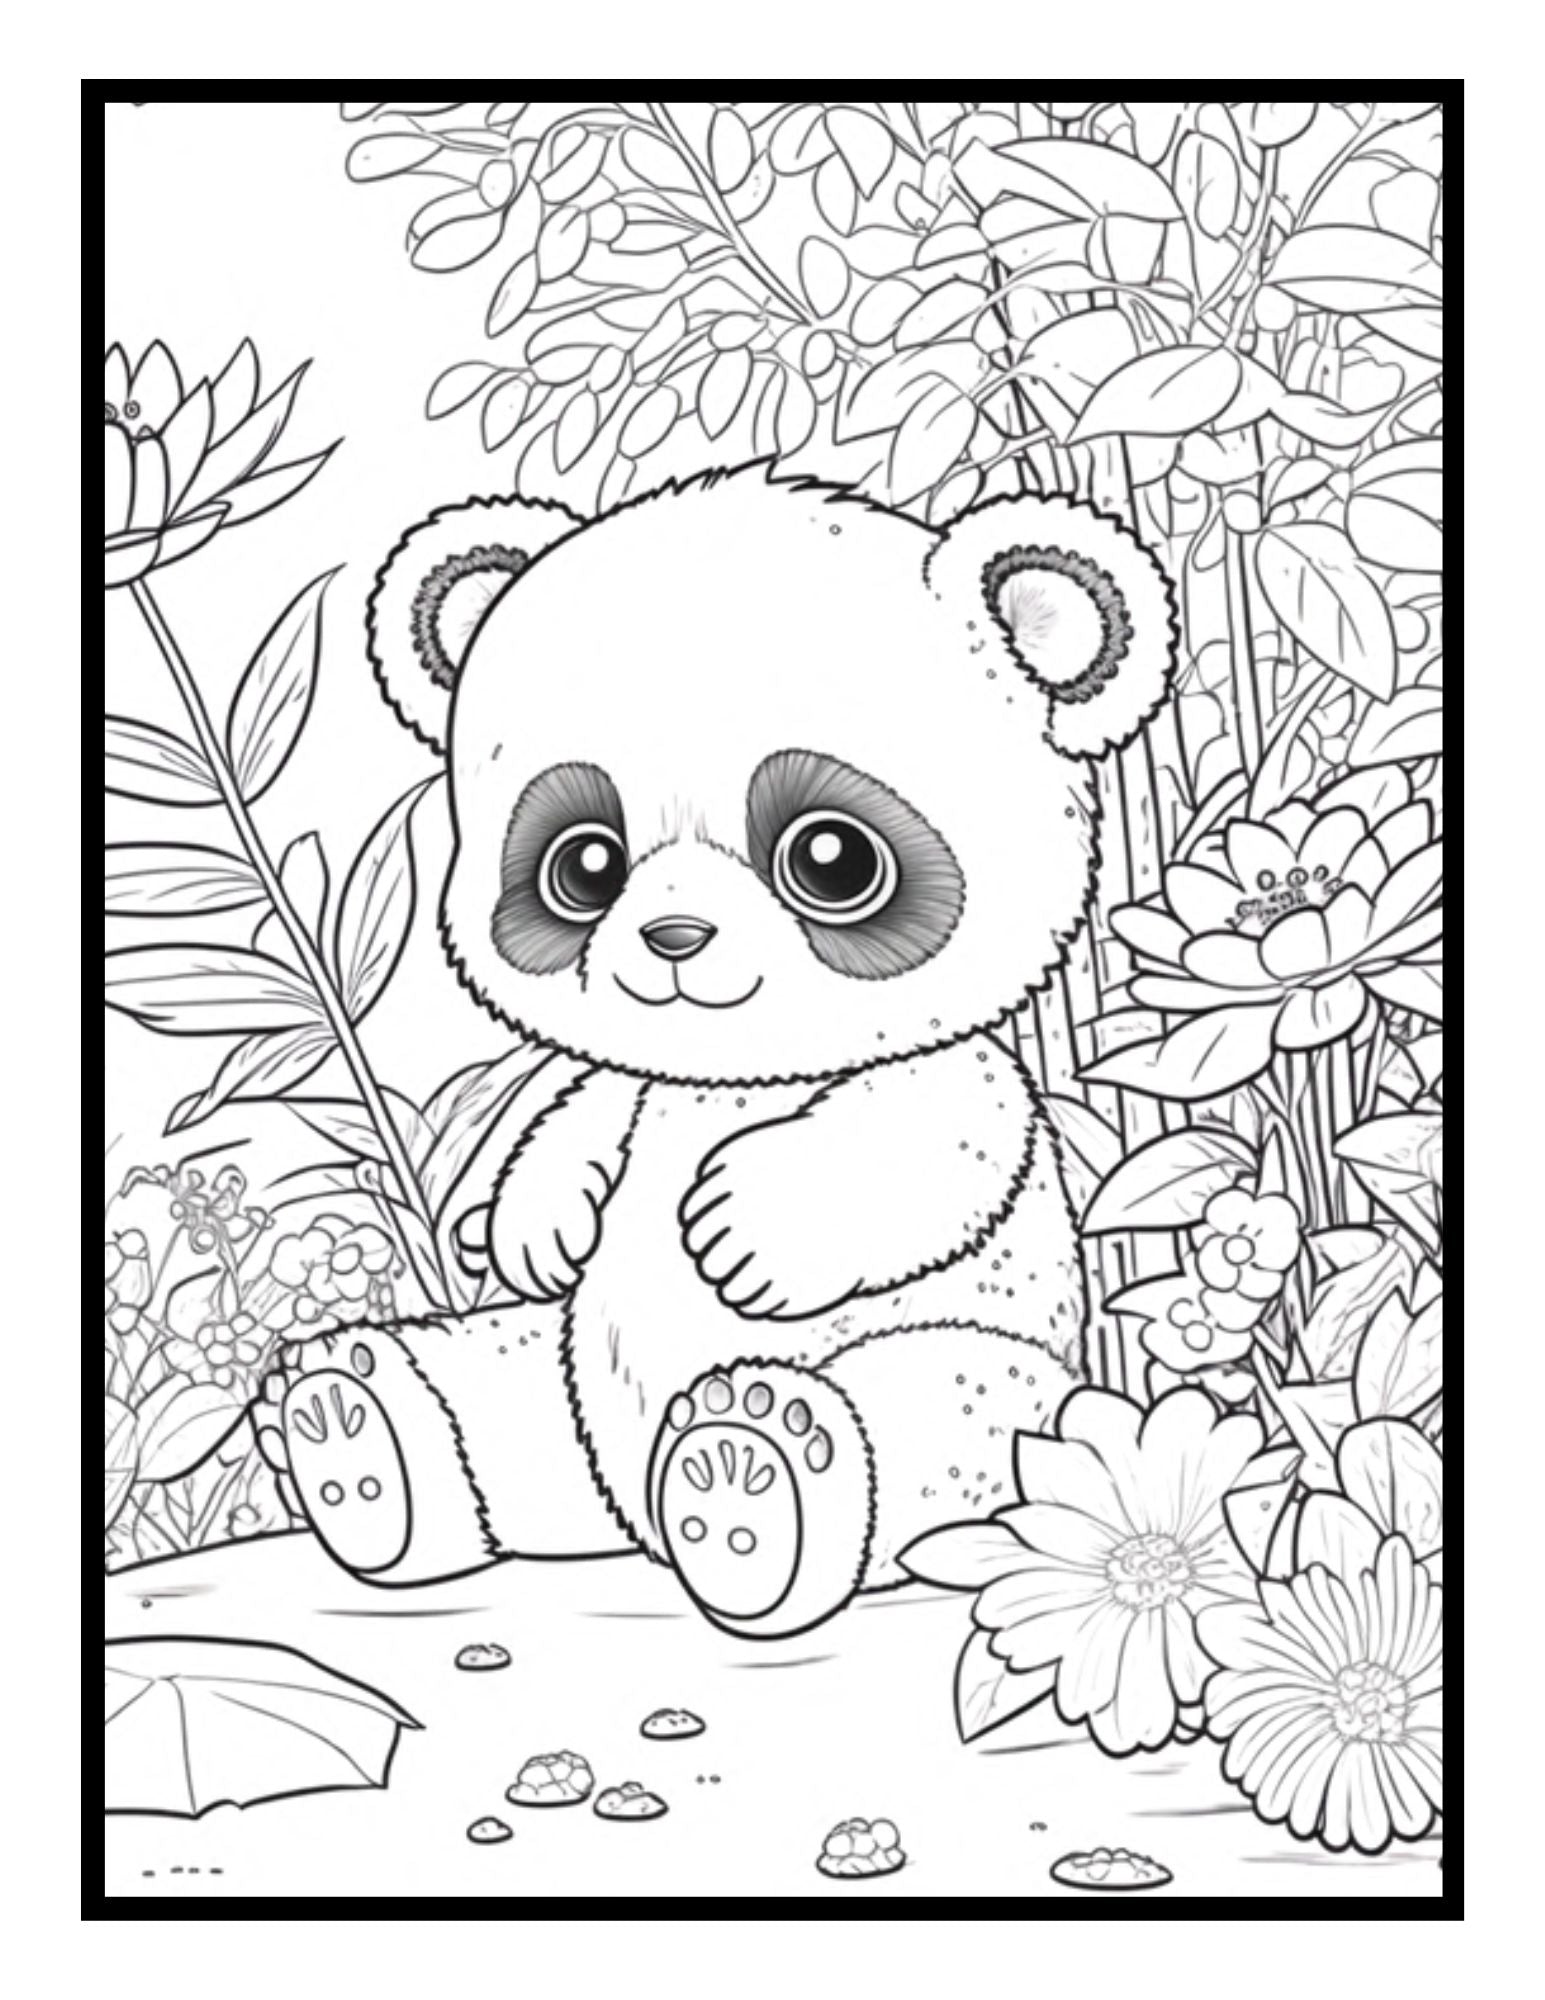 Cute Panda Coloring Books for Kids Ages 8-12: Stress Relief & Relaxation  for Kids-Kawaii & Beautiful Panda Gift,Perfect Birthday Present for Boys  and